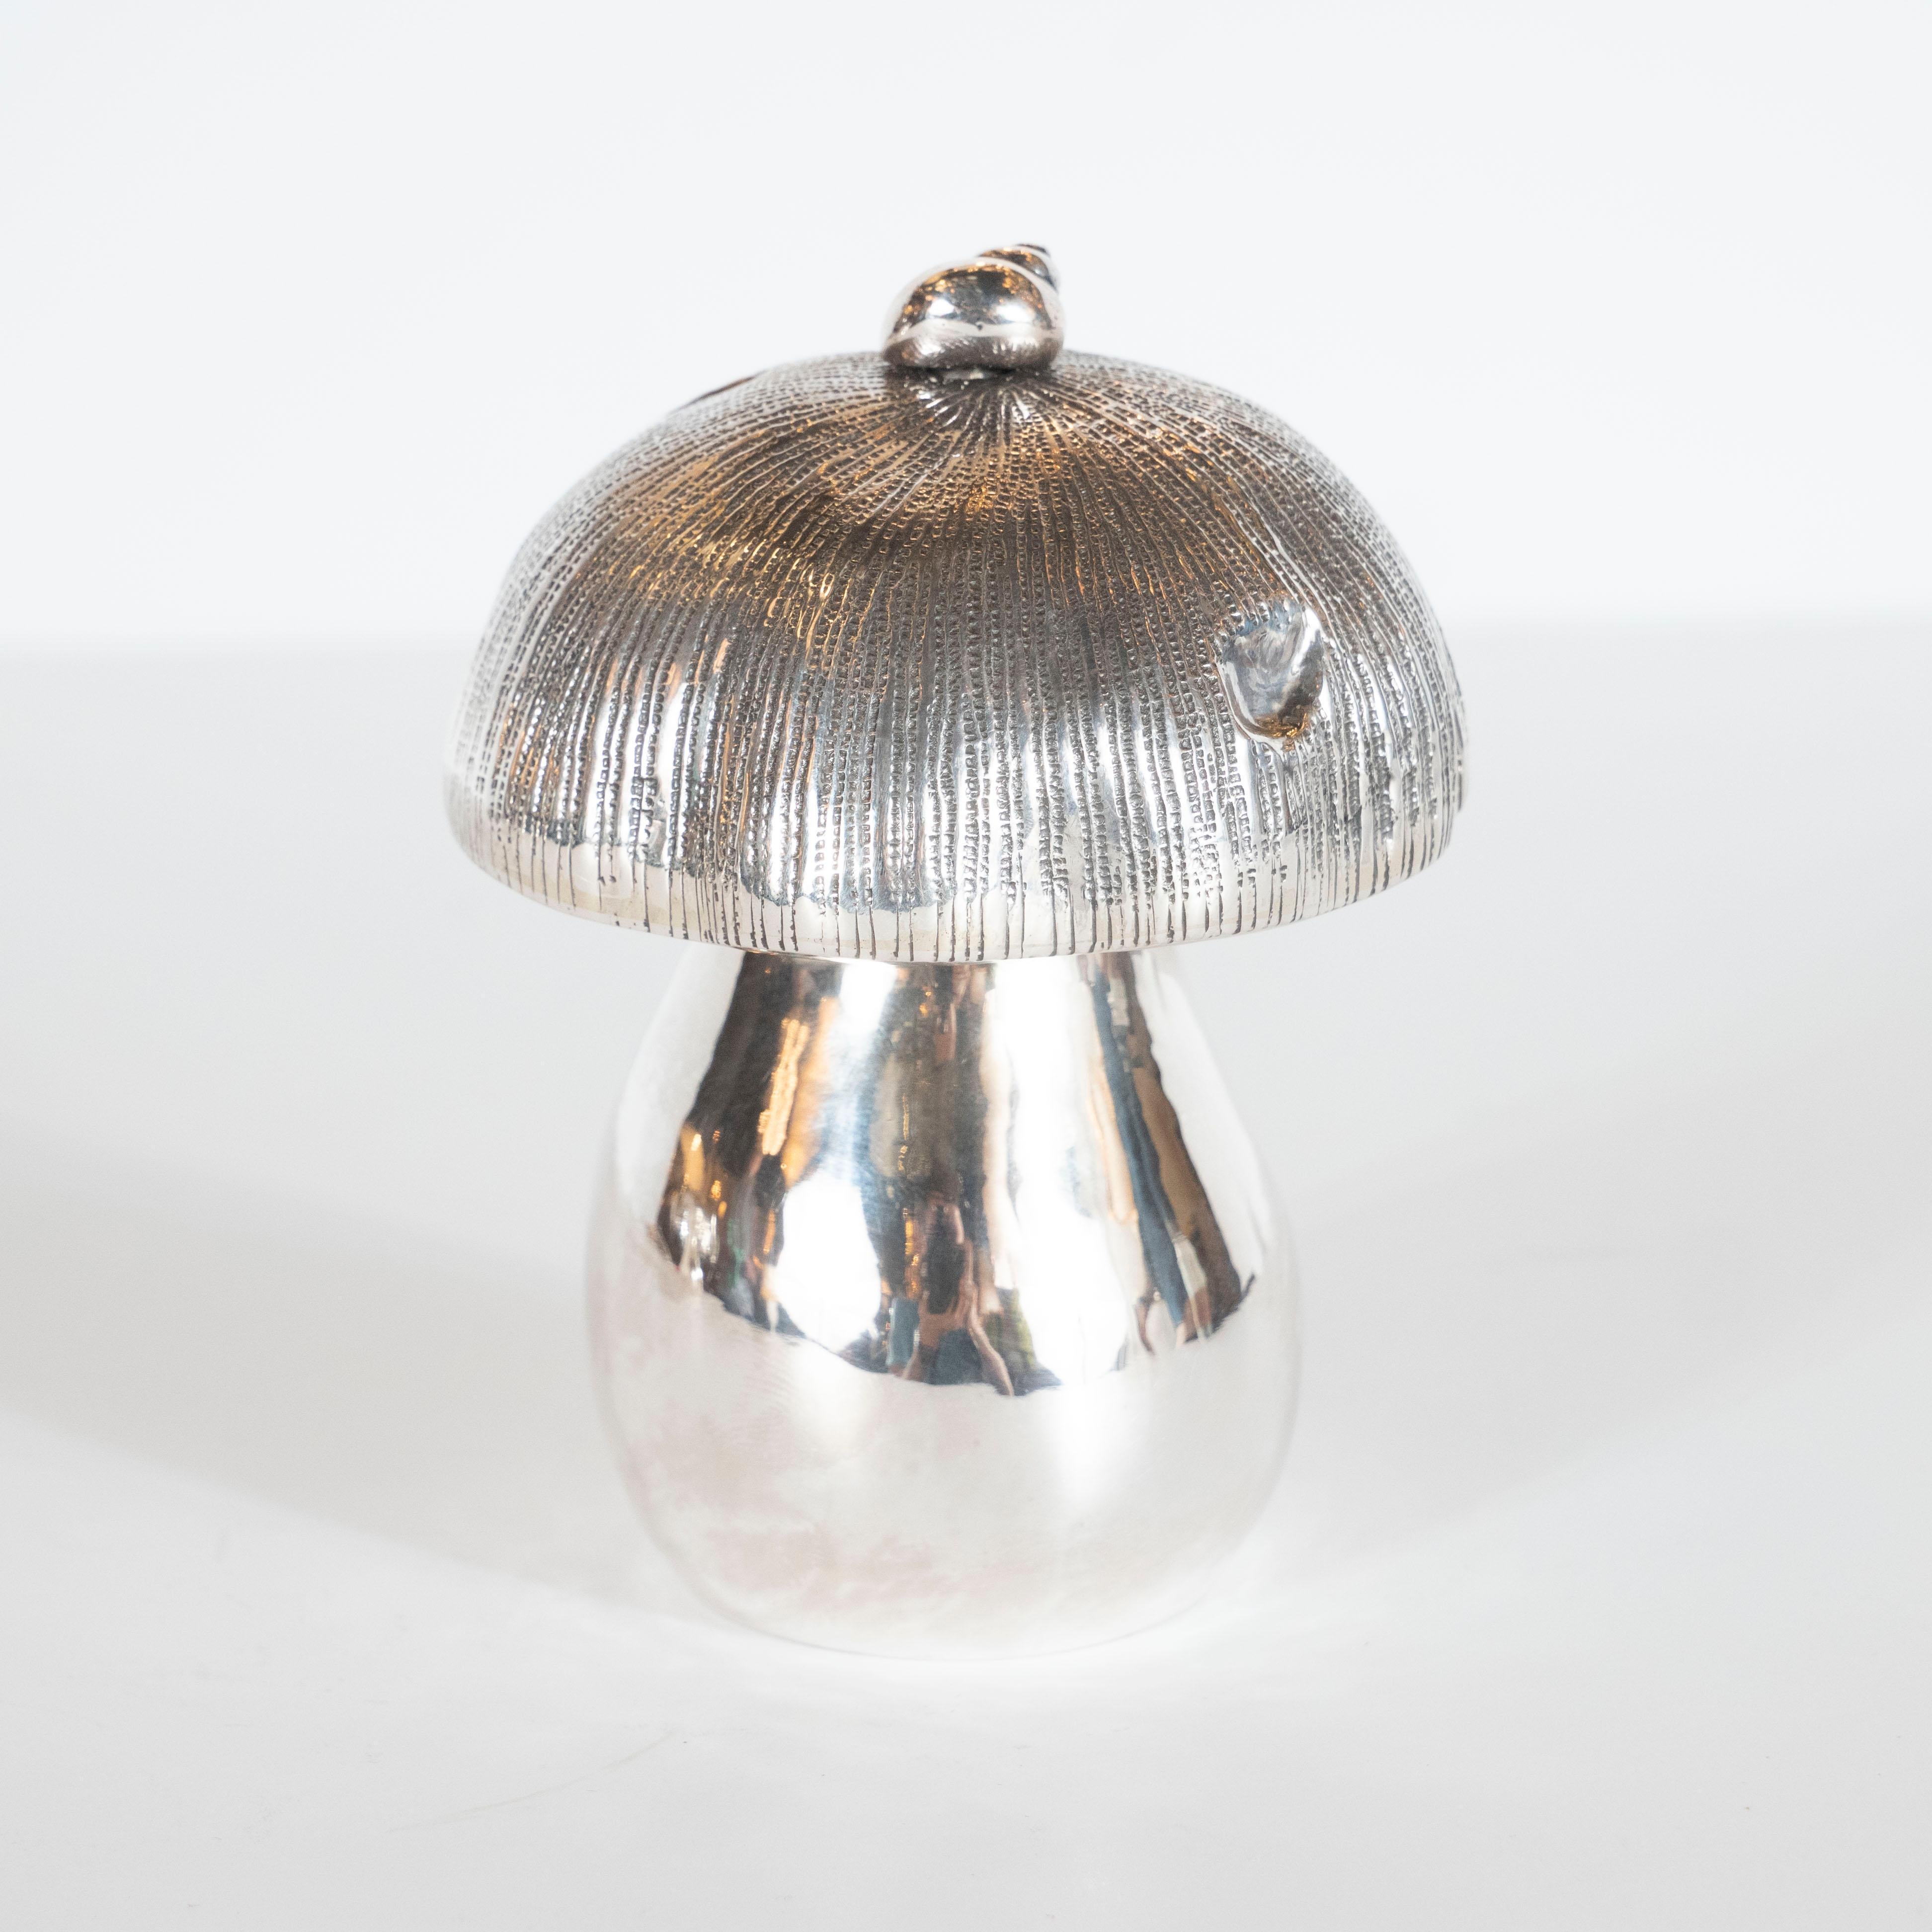 Handcrafted Sterling Silver Mushroom Salt Shaker and Pepper Mill by Missiaglia 1